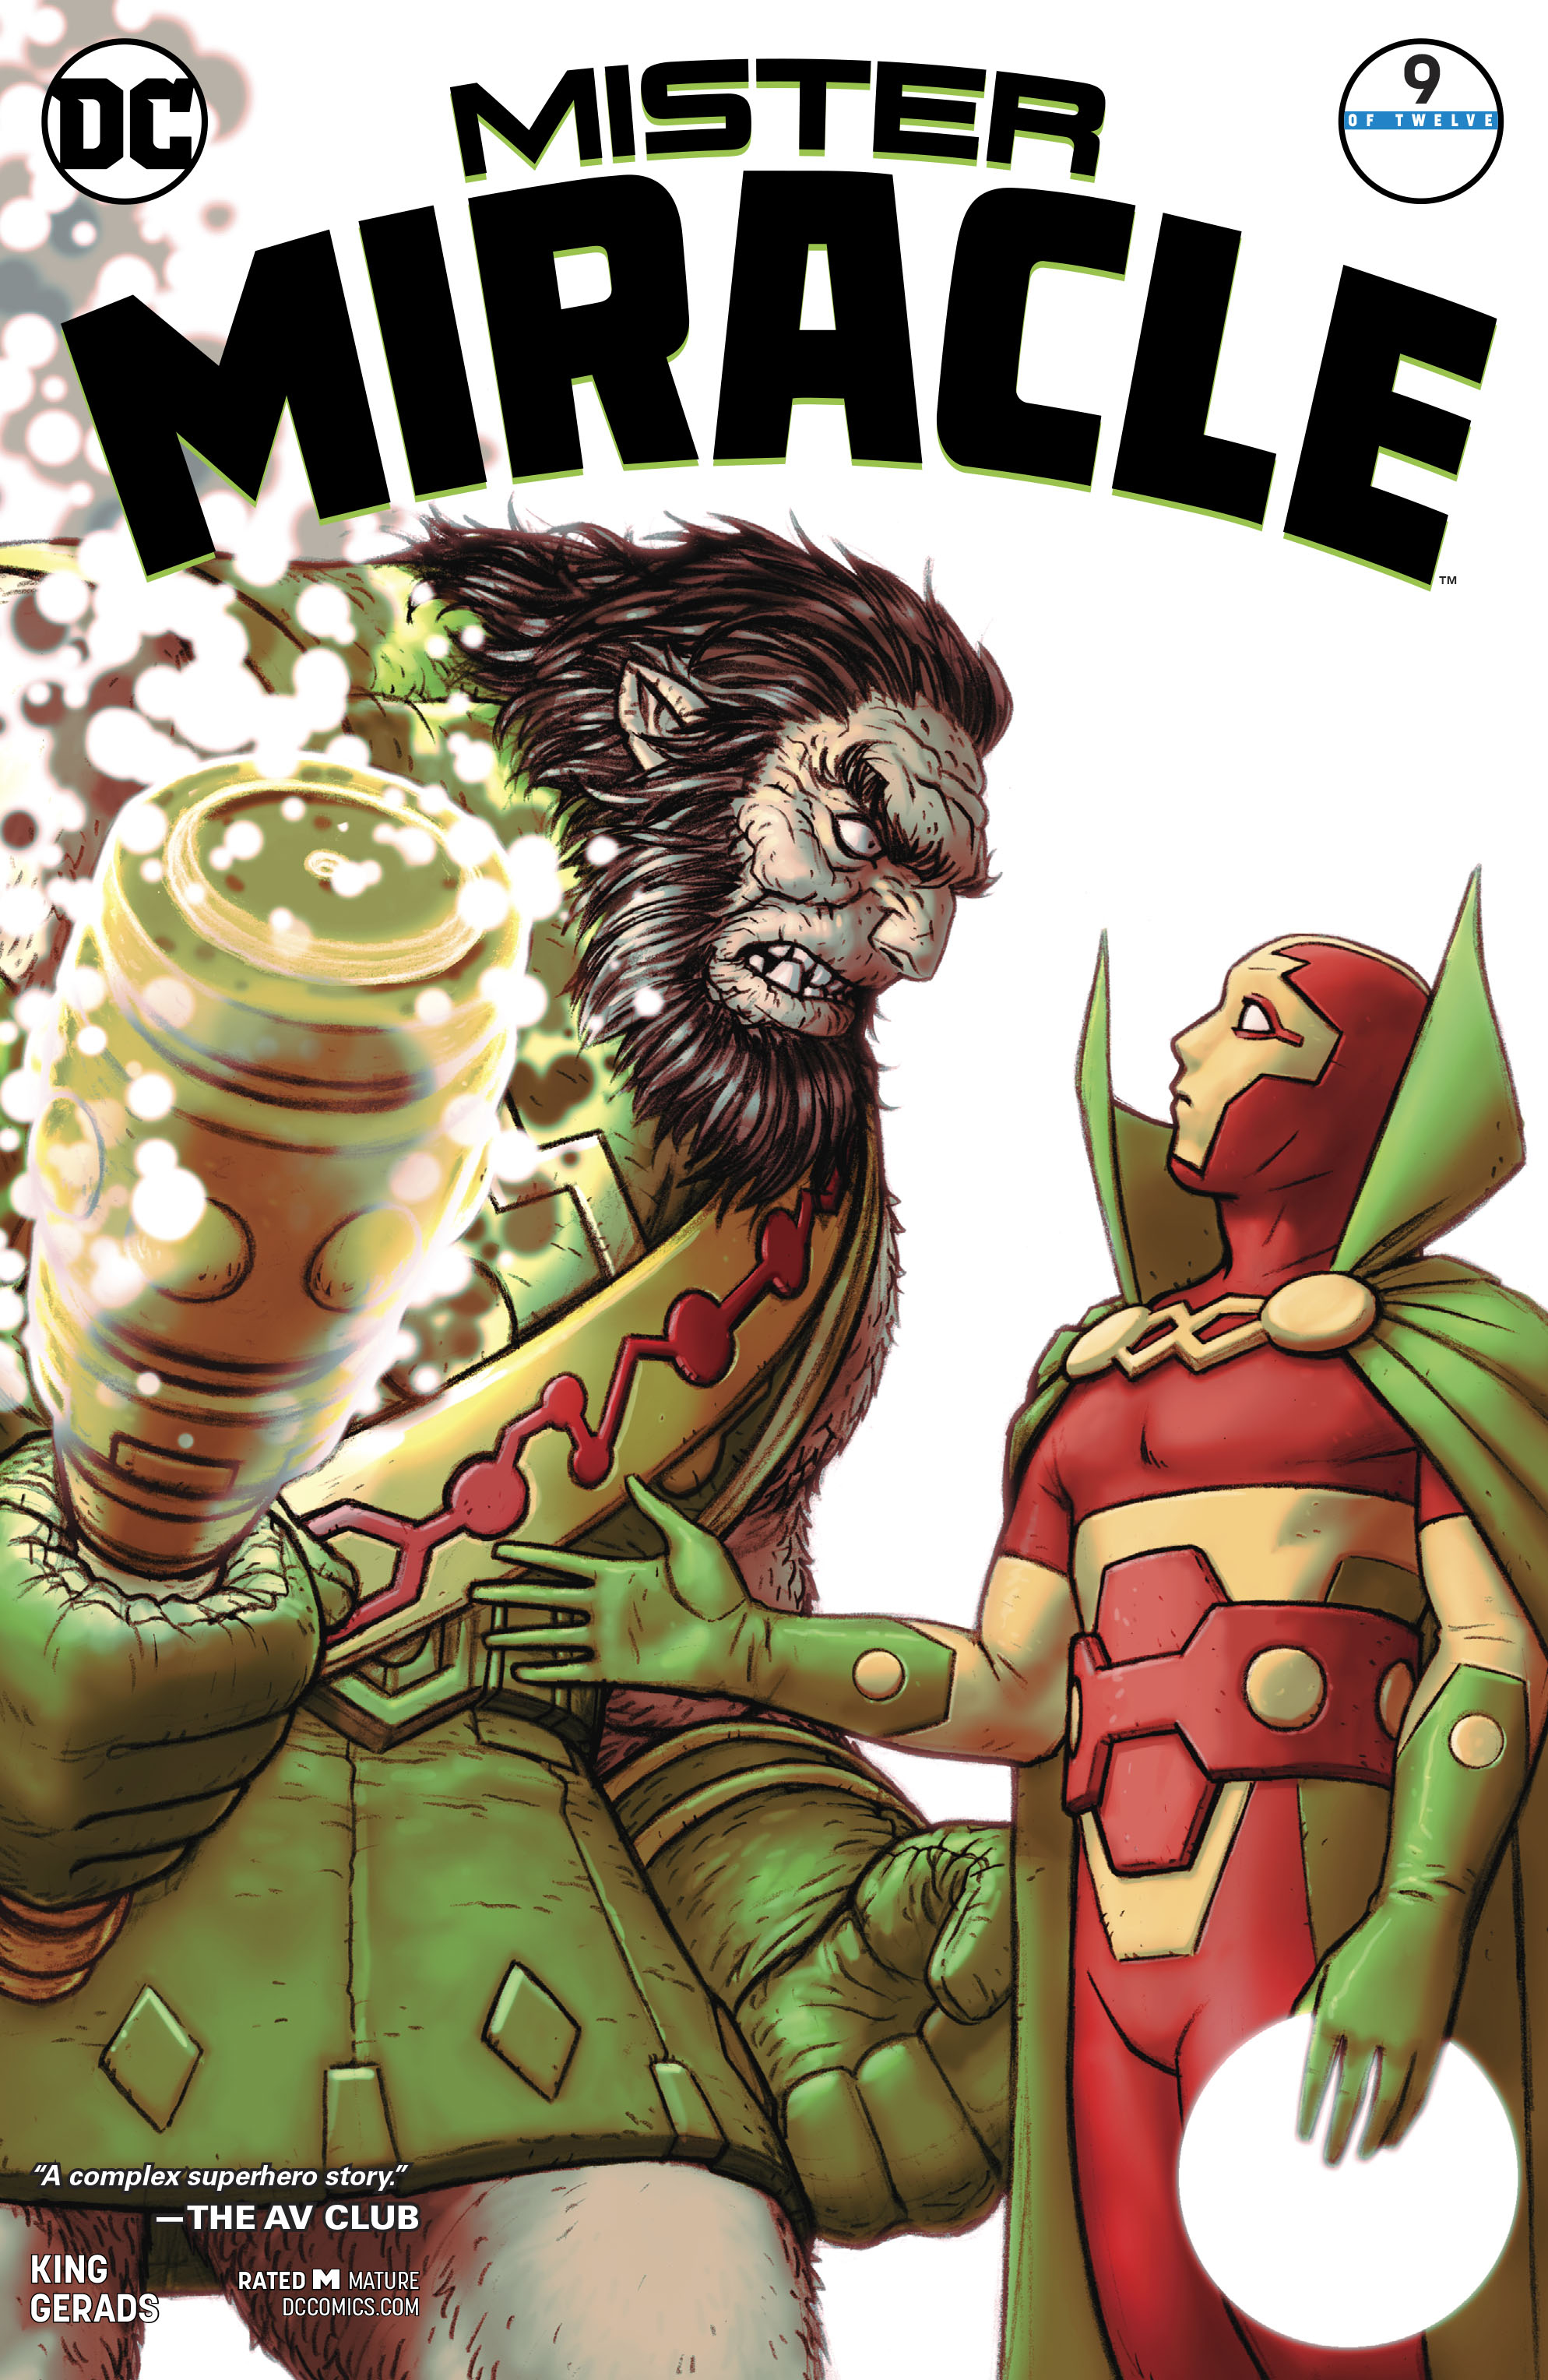 MISTER MIRACLE #9 (OF 12) (MR)